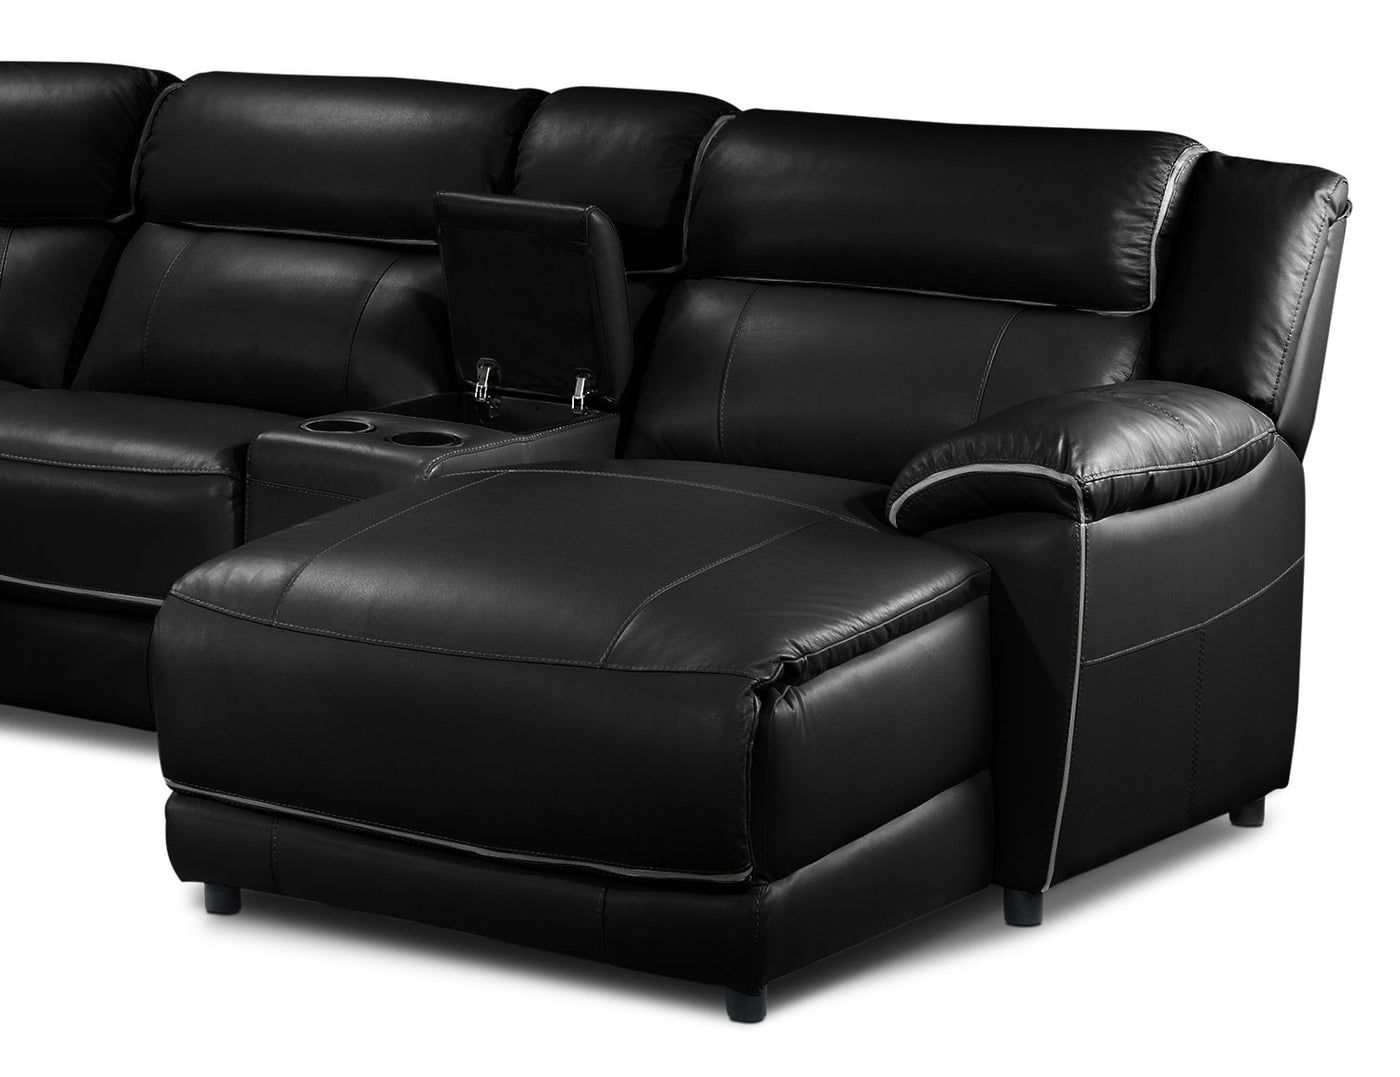 Holton 5 Piece Sectional With Right Facing Chaise – Black | Leon's Inside Right Facing Black Sofas (Gallery 2 of 20)